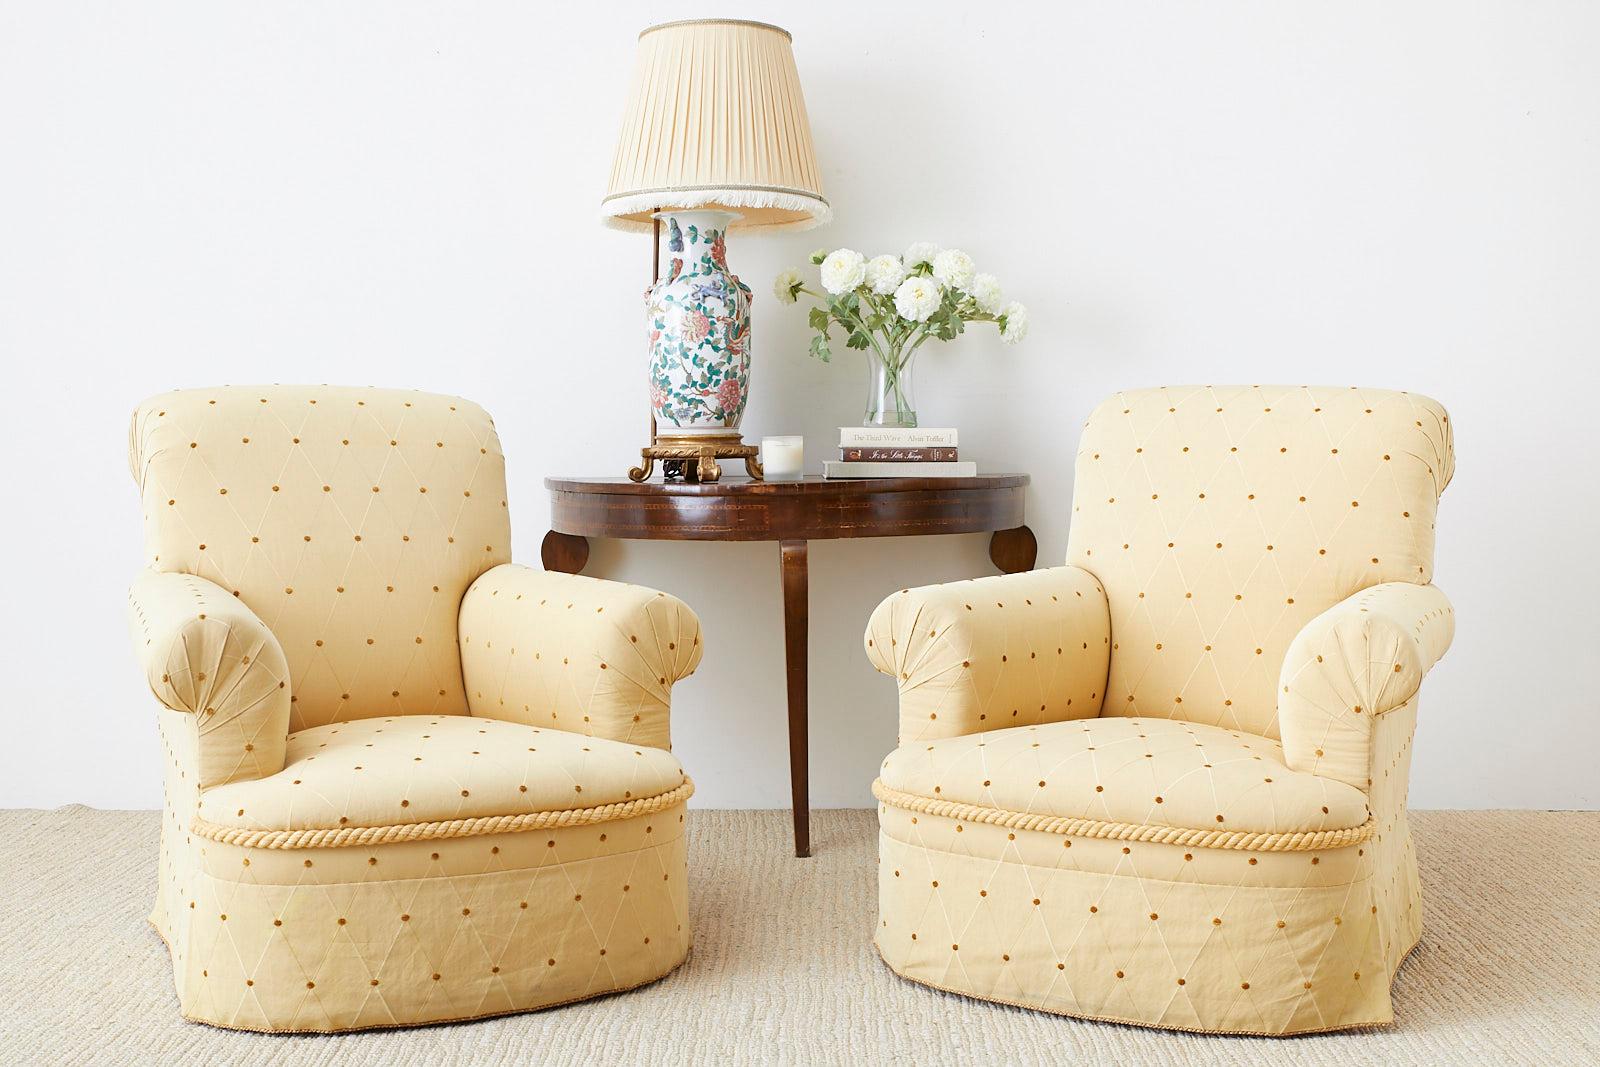 Bespoke pair of oversized club chairs featuring English style rolled arms and a scrolled back. Upholstered in a light citron yellow fabric with a geometric diamond pattern design and round chenille accents throughout. The fronts have a decorative